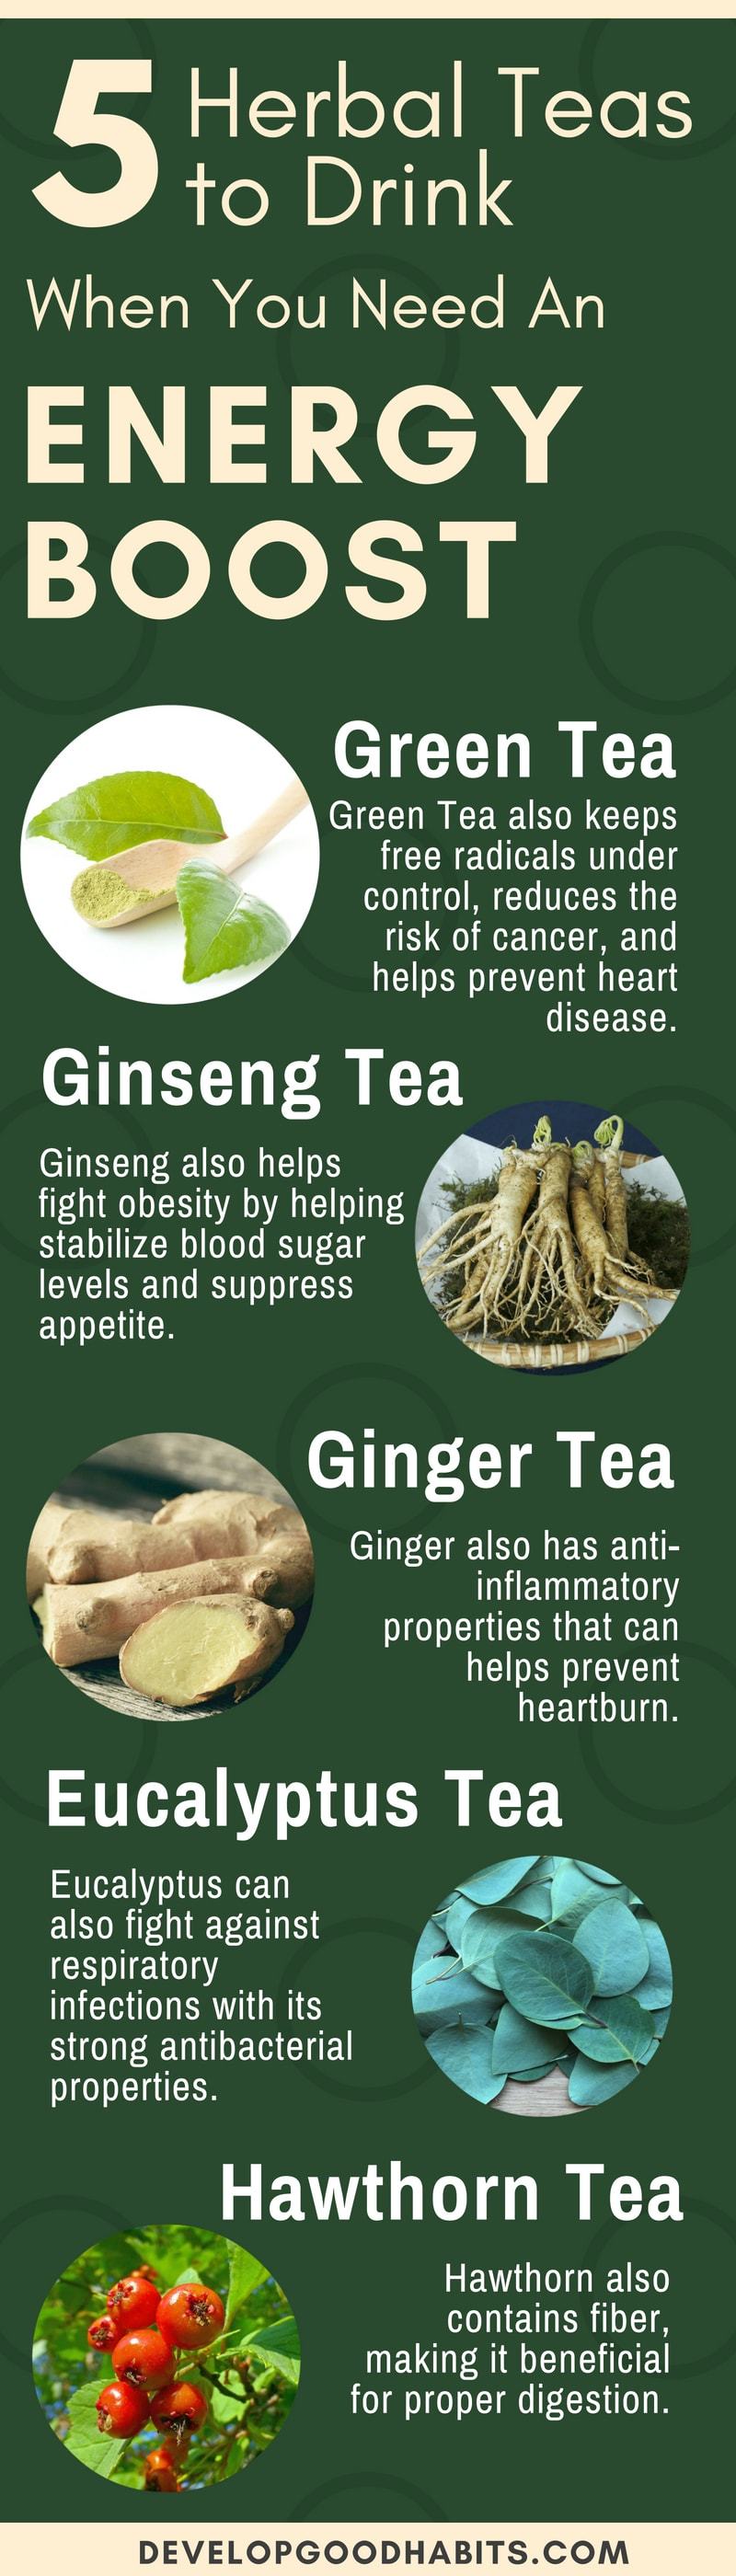 5 Herbal teas to drink when you need an energy boost and other 30 Types of Herbal Teas and Their Benefits in this ultimate guide to choosing the best herbal teas for your needs.| Herbal tea benefits #longevity #infographic #healthyliving #healthylifestyle #wellness #healthyhabits #healthier #organic #natural #holistic